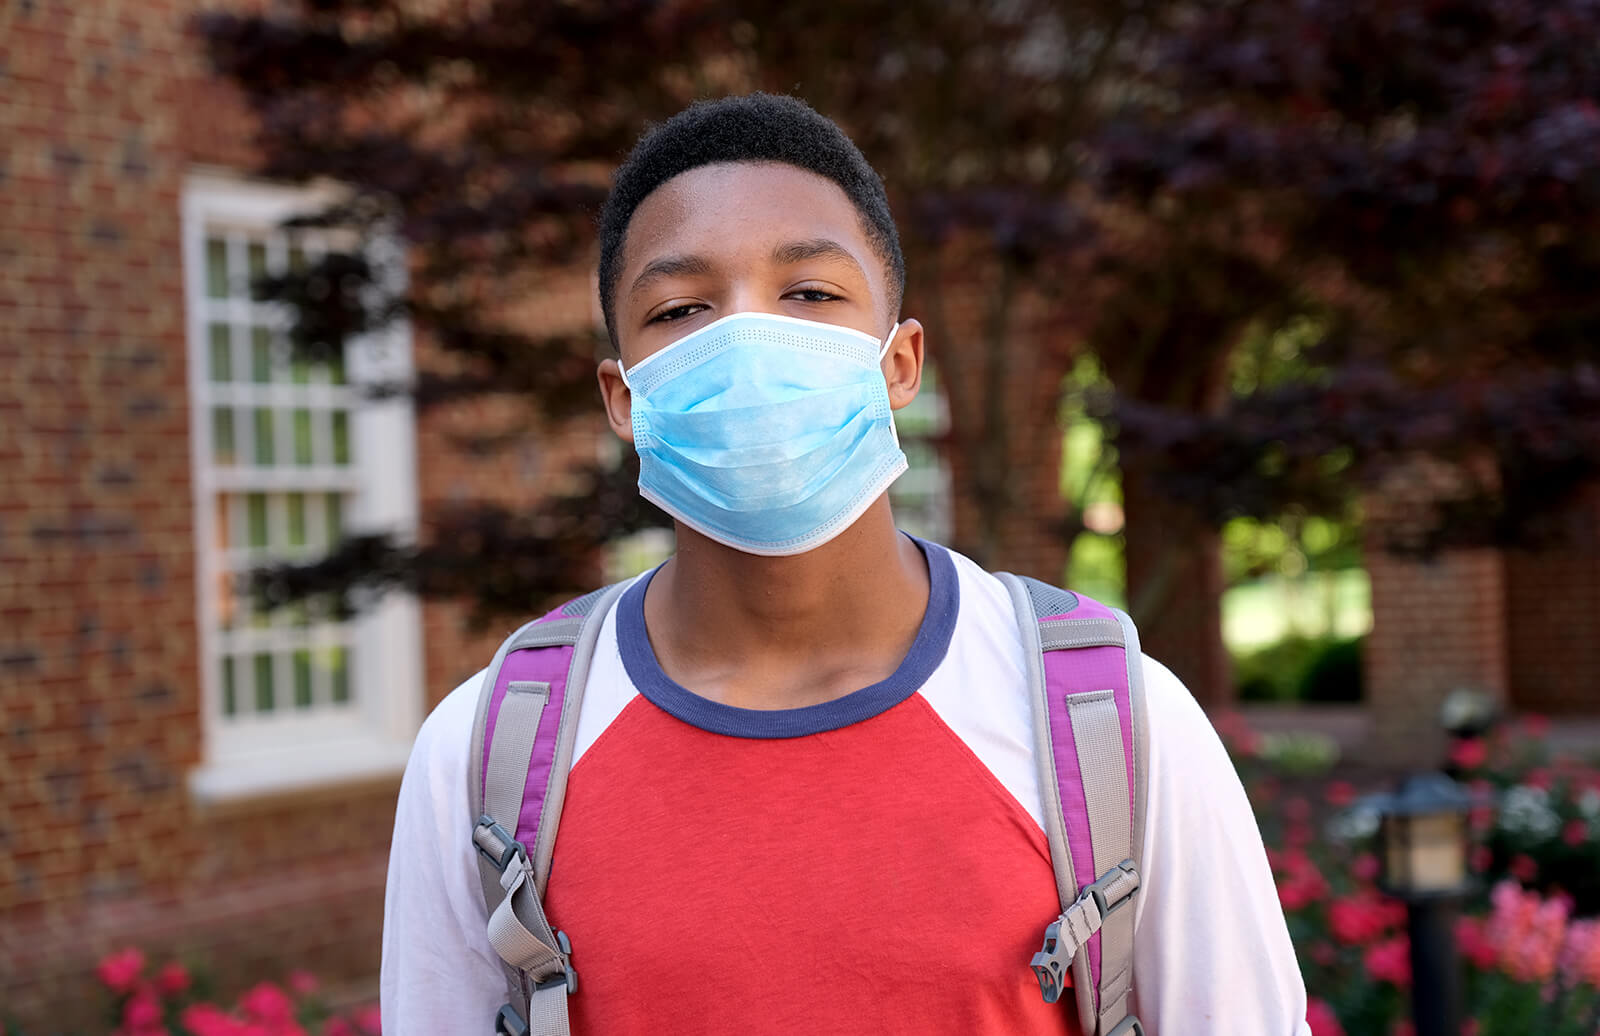 An African American teenager wears a backpack and facial mask to protect himself from COVID-19. He is standing in front of a brick building and pink flowers.